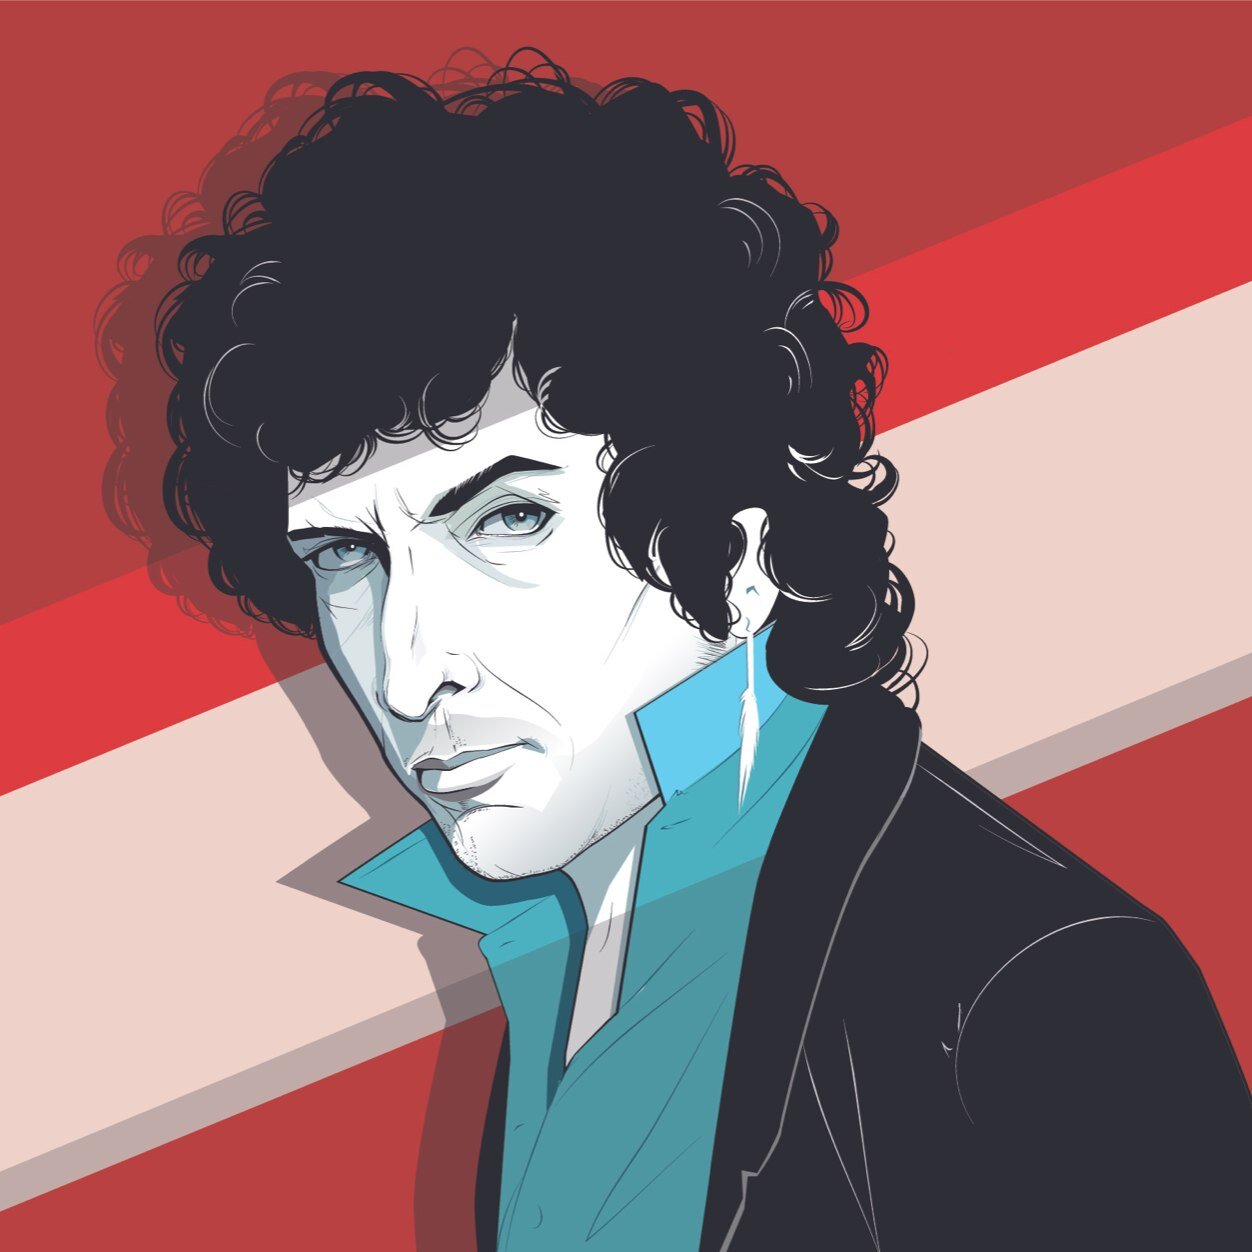 Bob Dylan In The 80s: Volume One /// Available Now on ATO Records! http://t.co/1RdV0ZbQpC